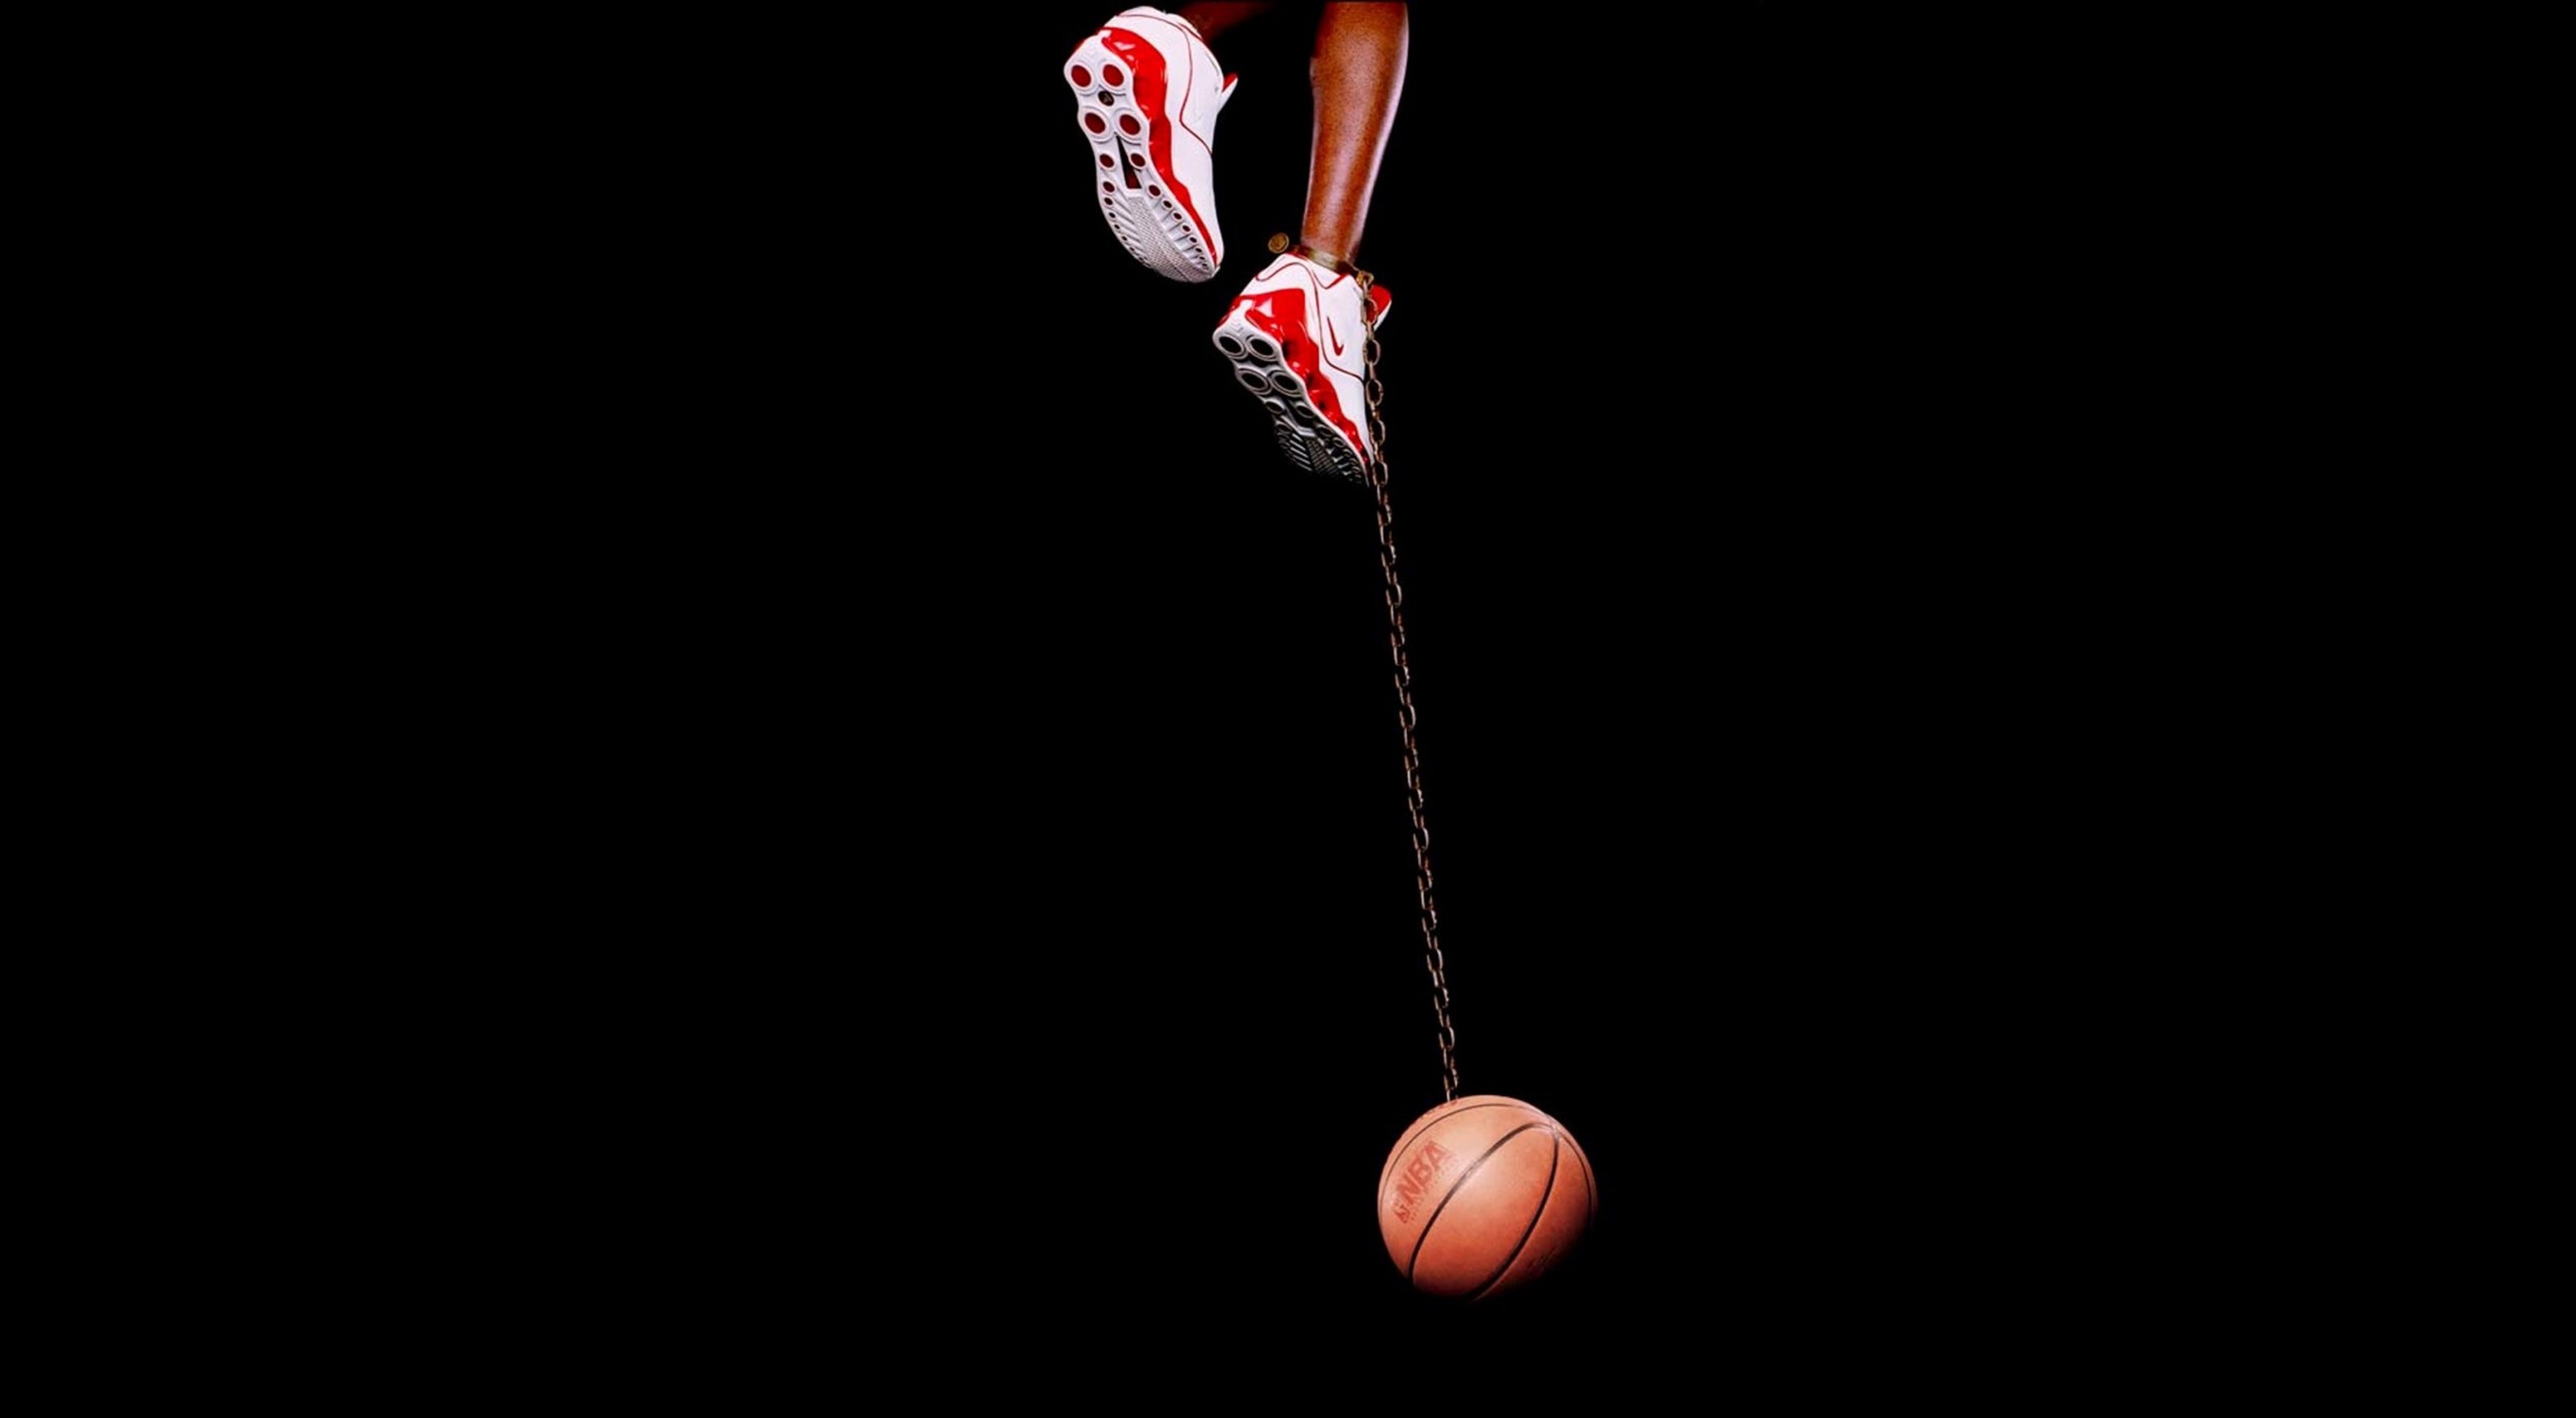 With a metal chain, a basketball hanging off a pair of feet in Jordan sneakers, Artwork by Hank Willis Thomas